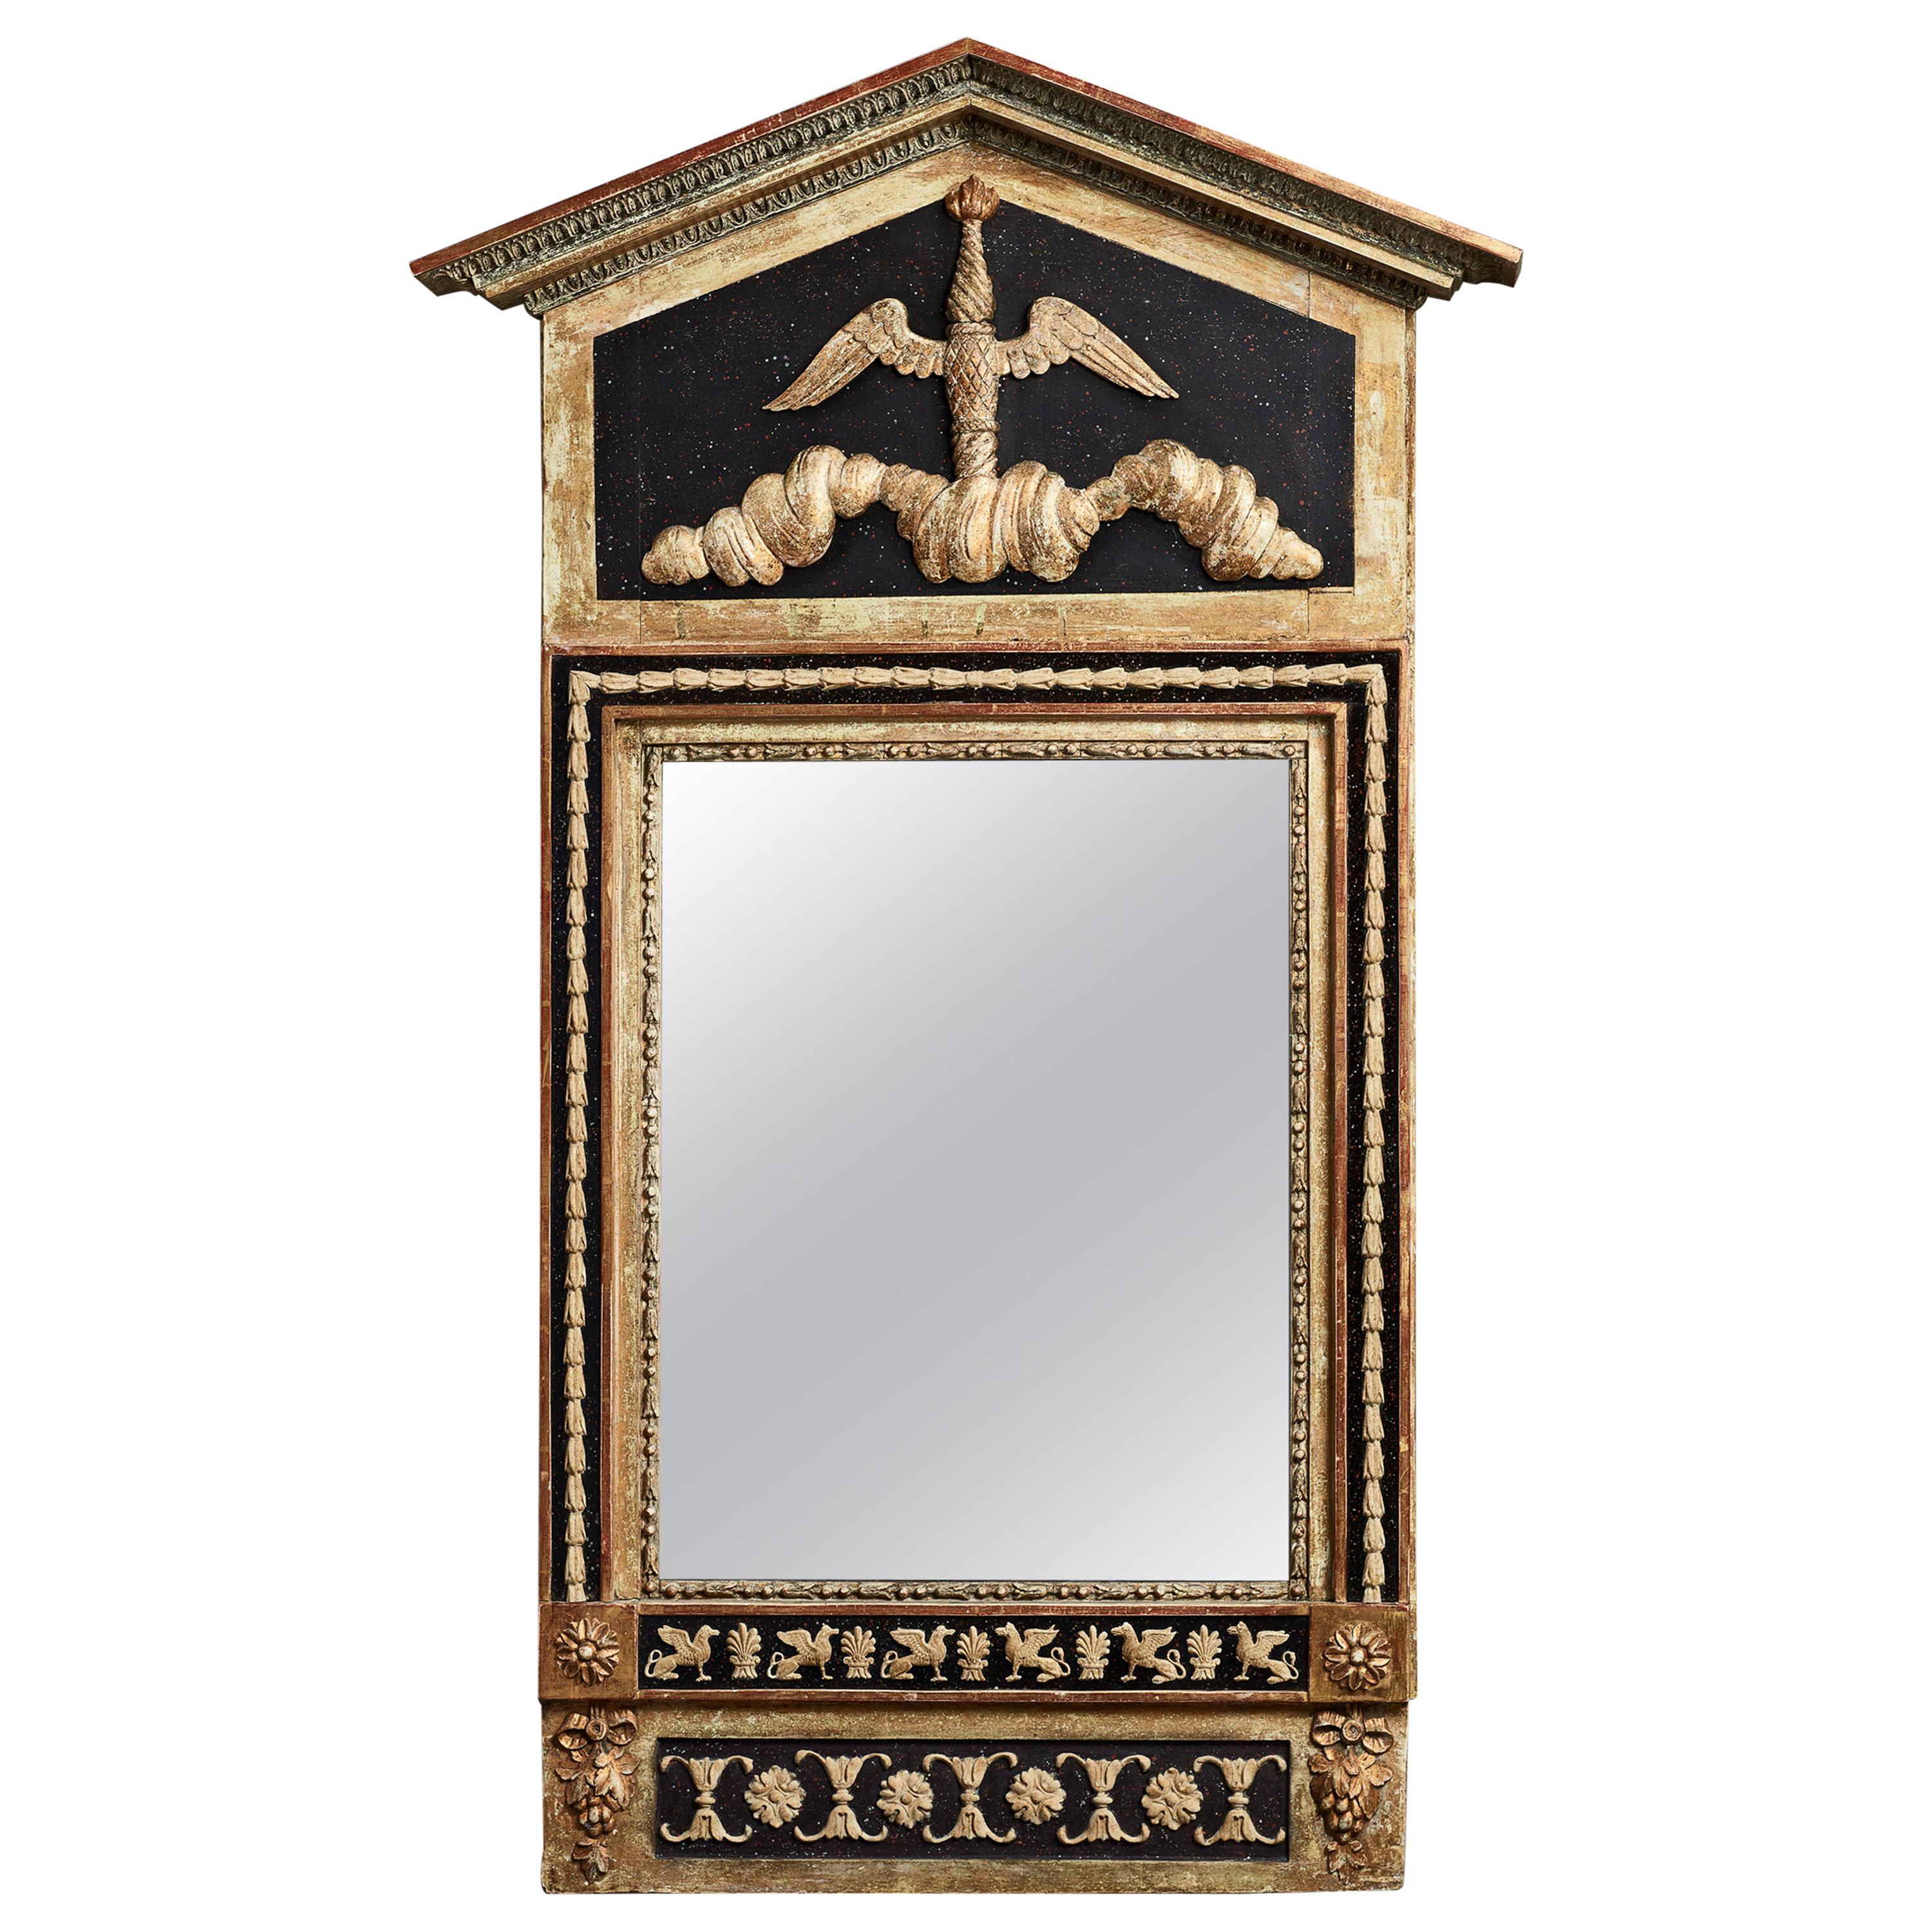 Early 19th Century Swedish Neoclassical Gustavian Wall Mirror with Faux Porphyry For Sale